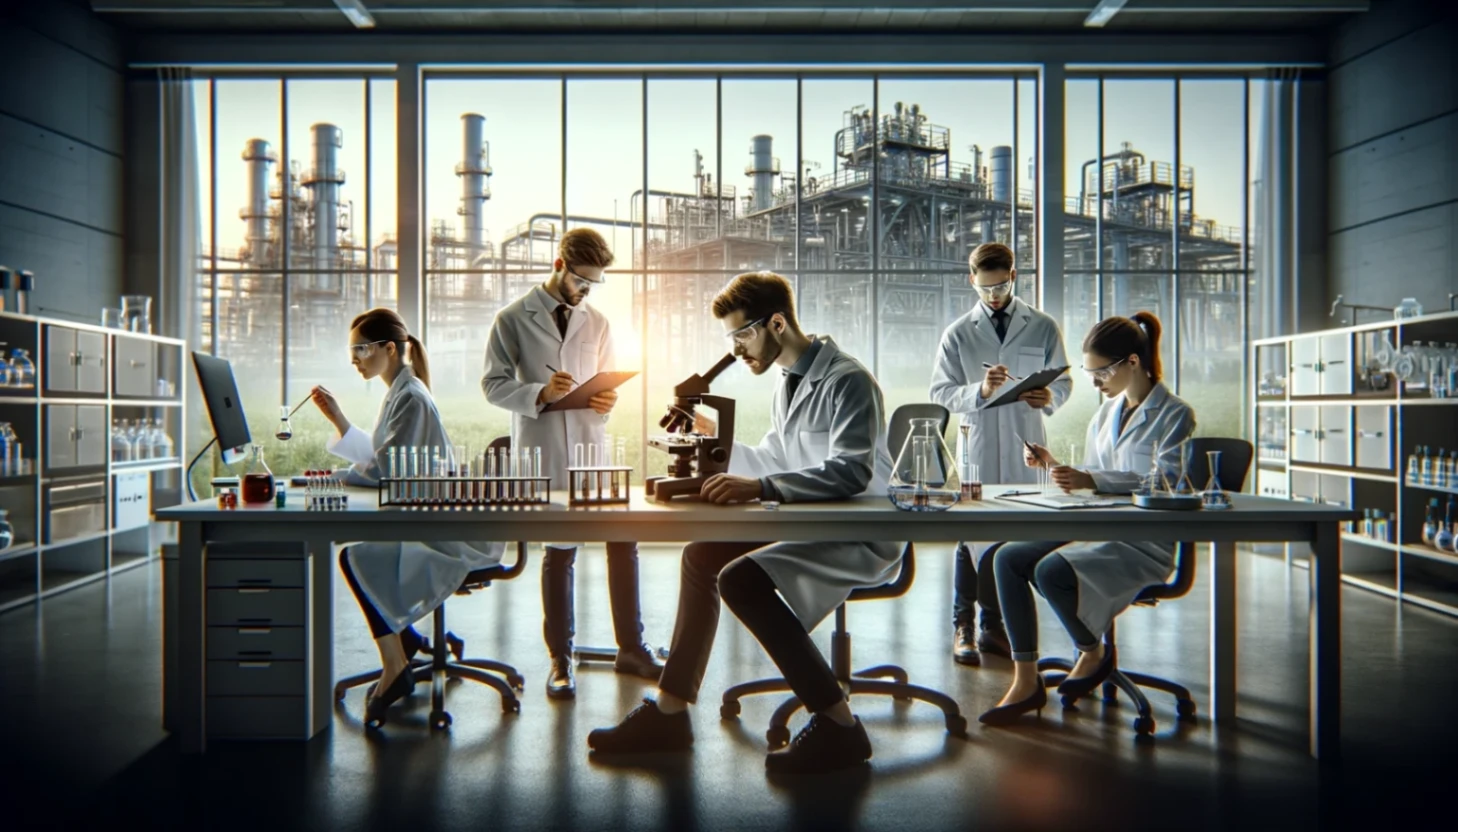 Chemical Industry Jobs: Salaries Starting at $45,000 – Ideal for New Graduates!